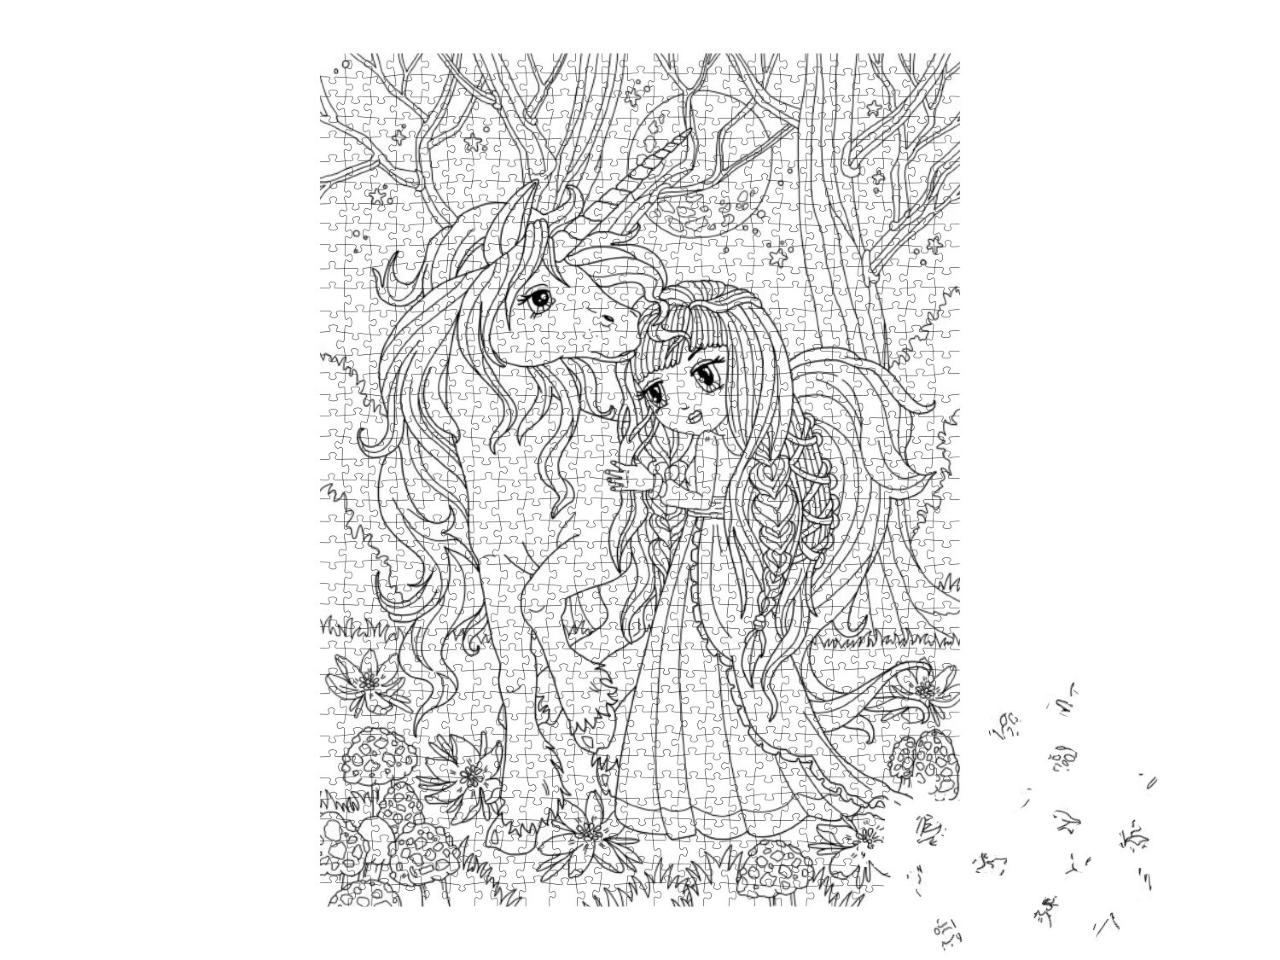 Coloring Page the Unicorn & Princess... Jigsaw Puzzle with 1000 pieces